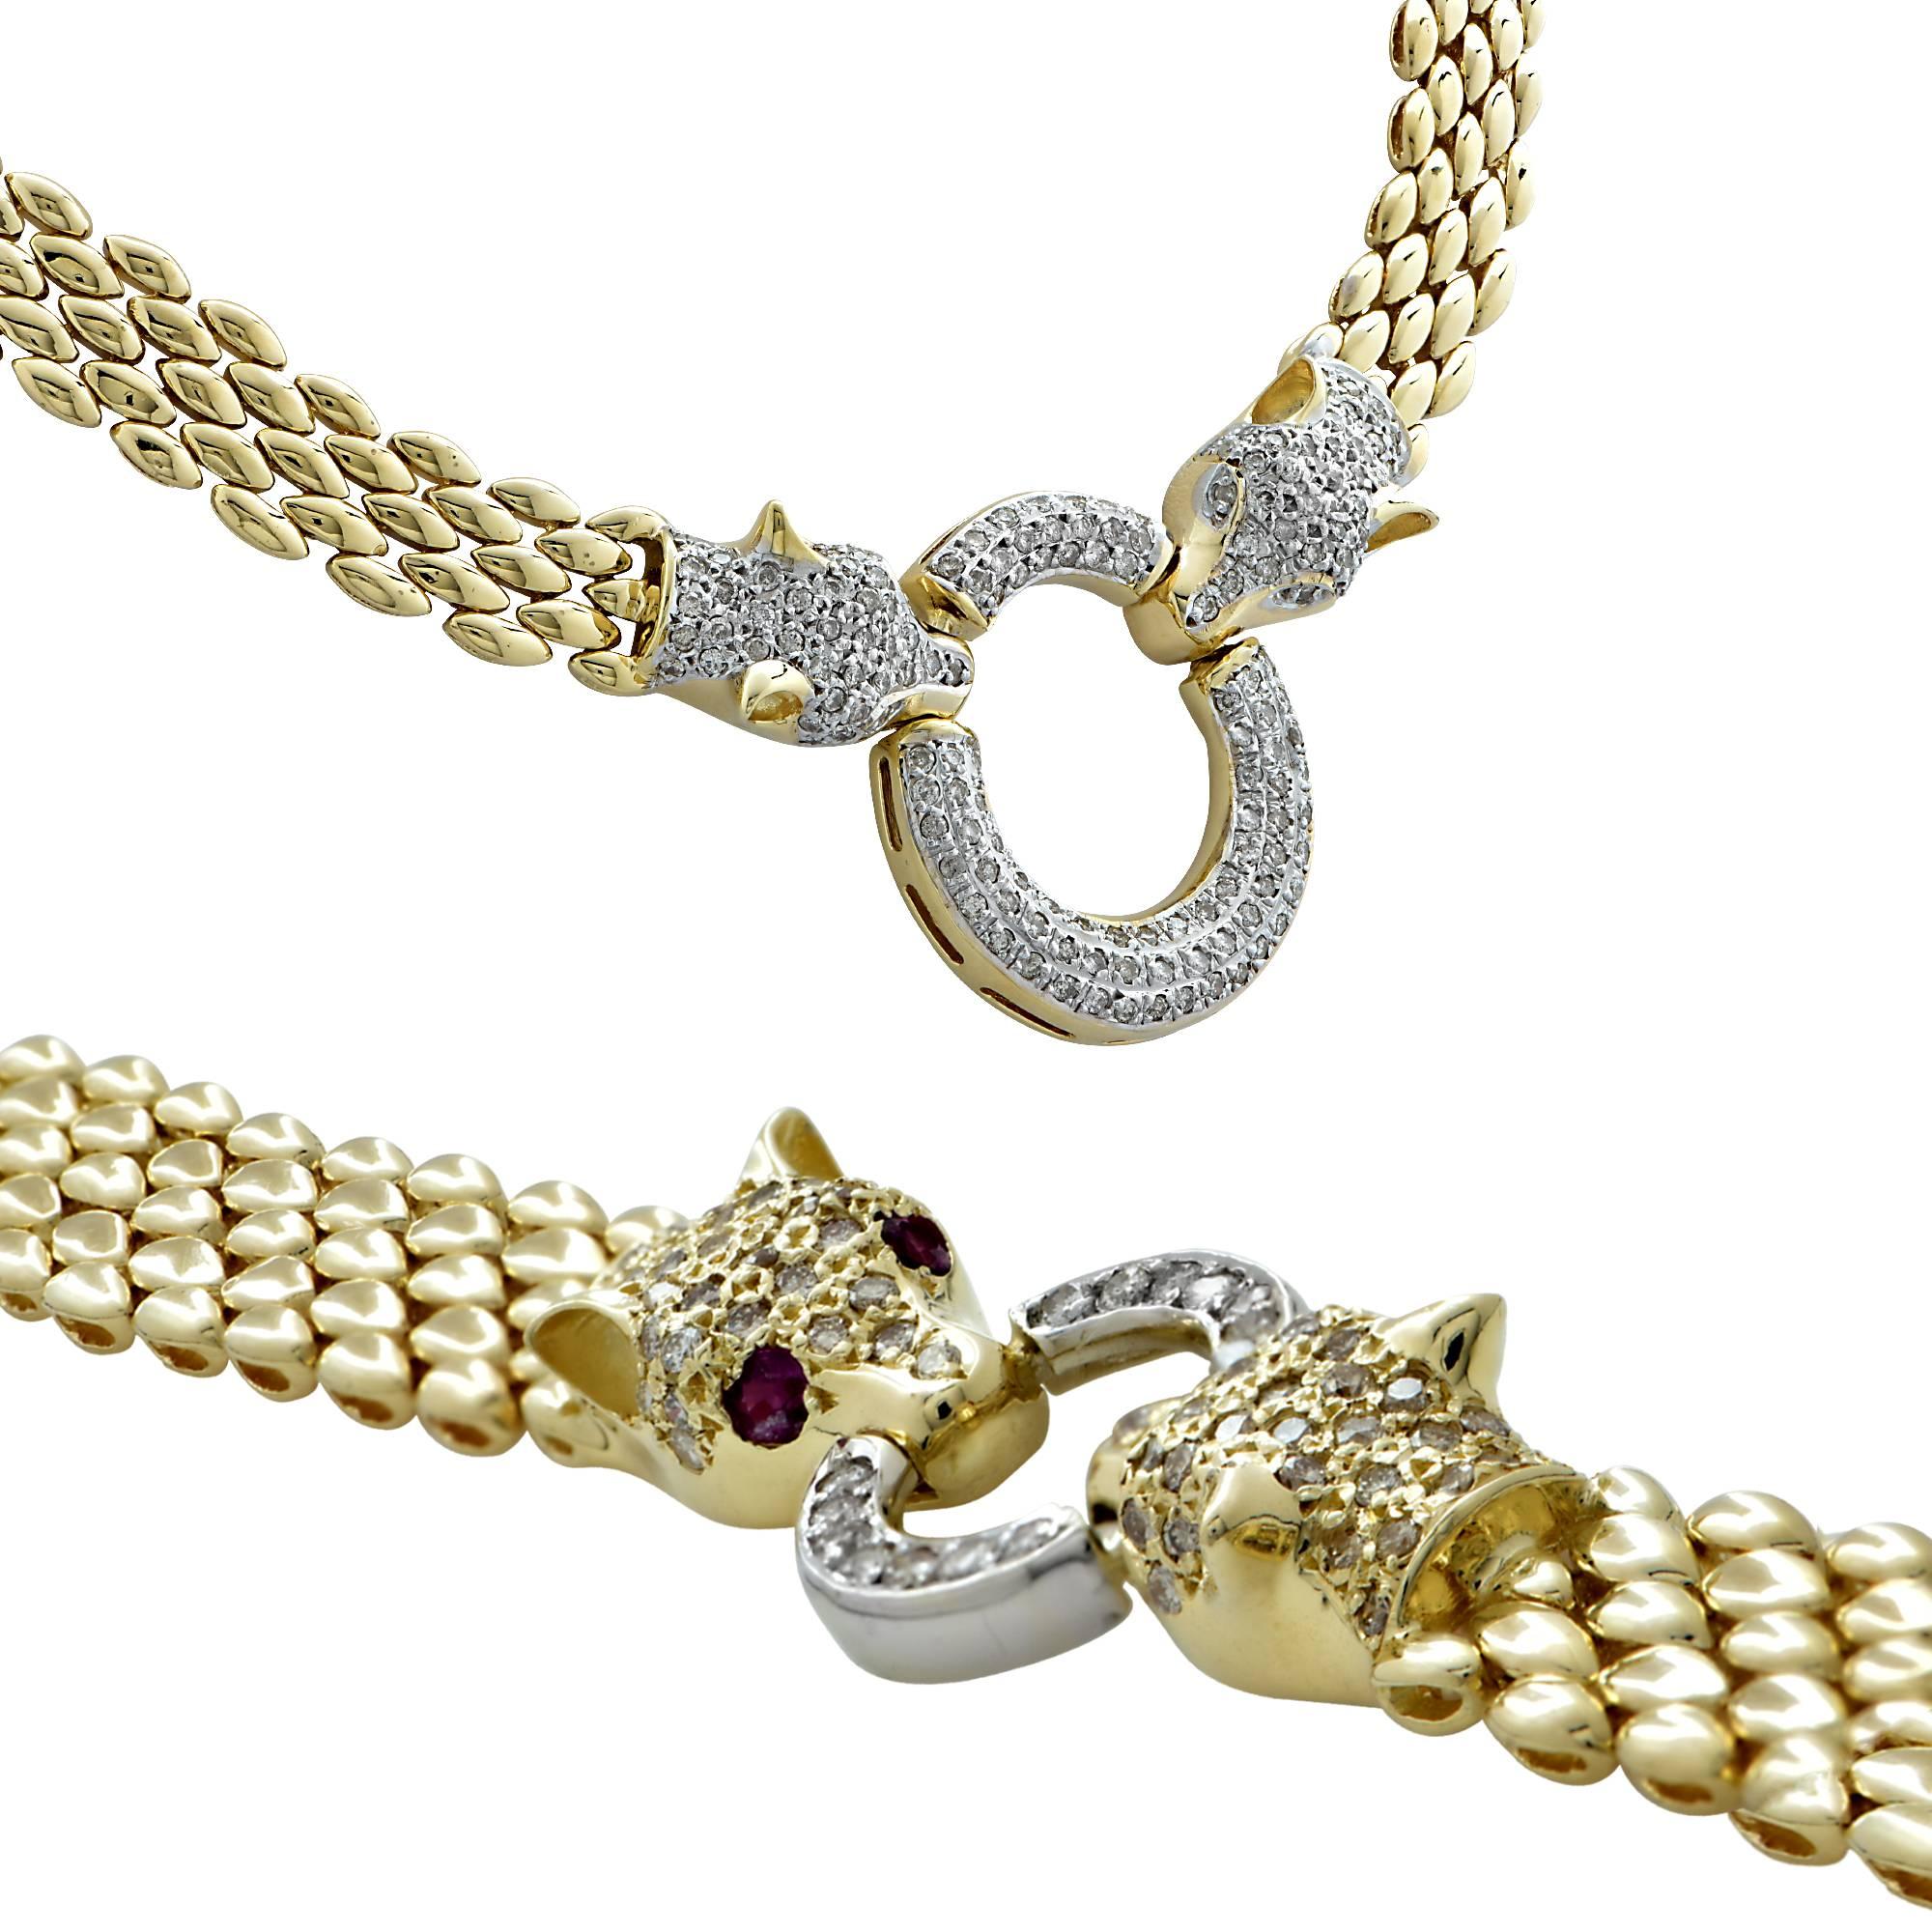 Seductive 14 Karat Yellow Gold necklace and bracelet set featuring four Panthers adorned with four rubies and 261 round brilliant cut diamonds weighing approximately 3.20 carats total weight, I-K color SI clarity. Necklace measures 16 inches long